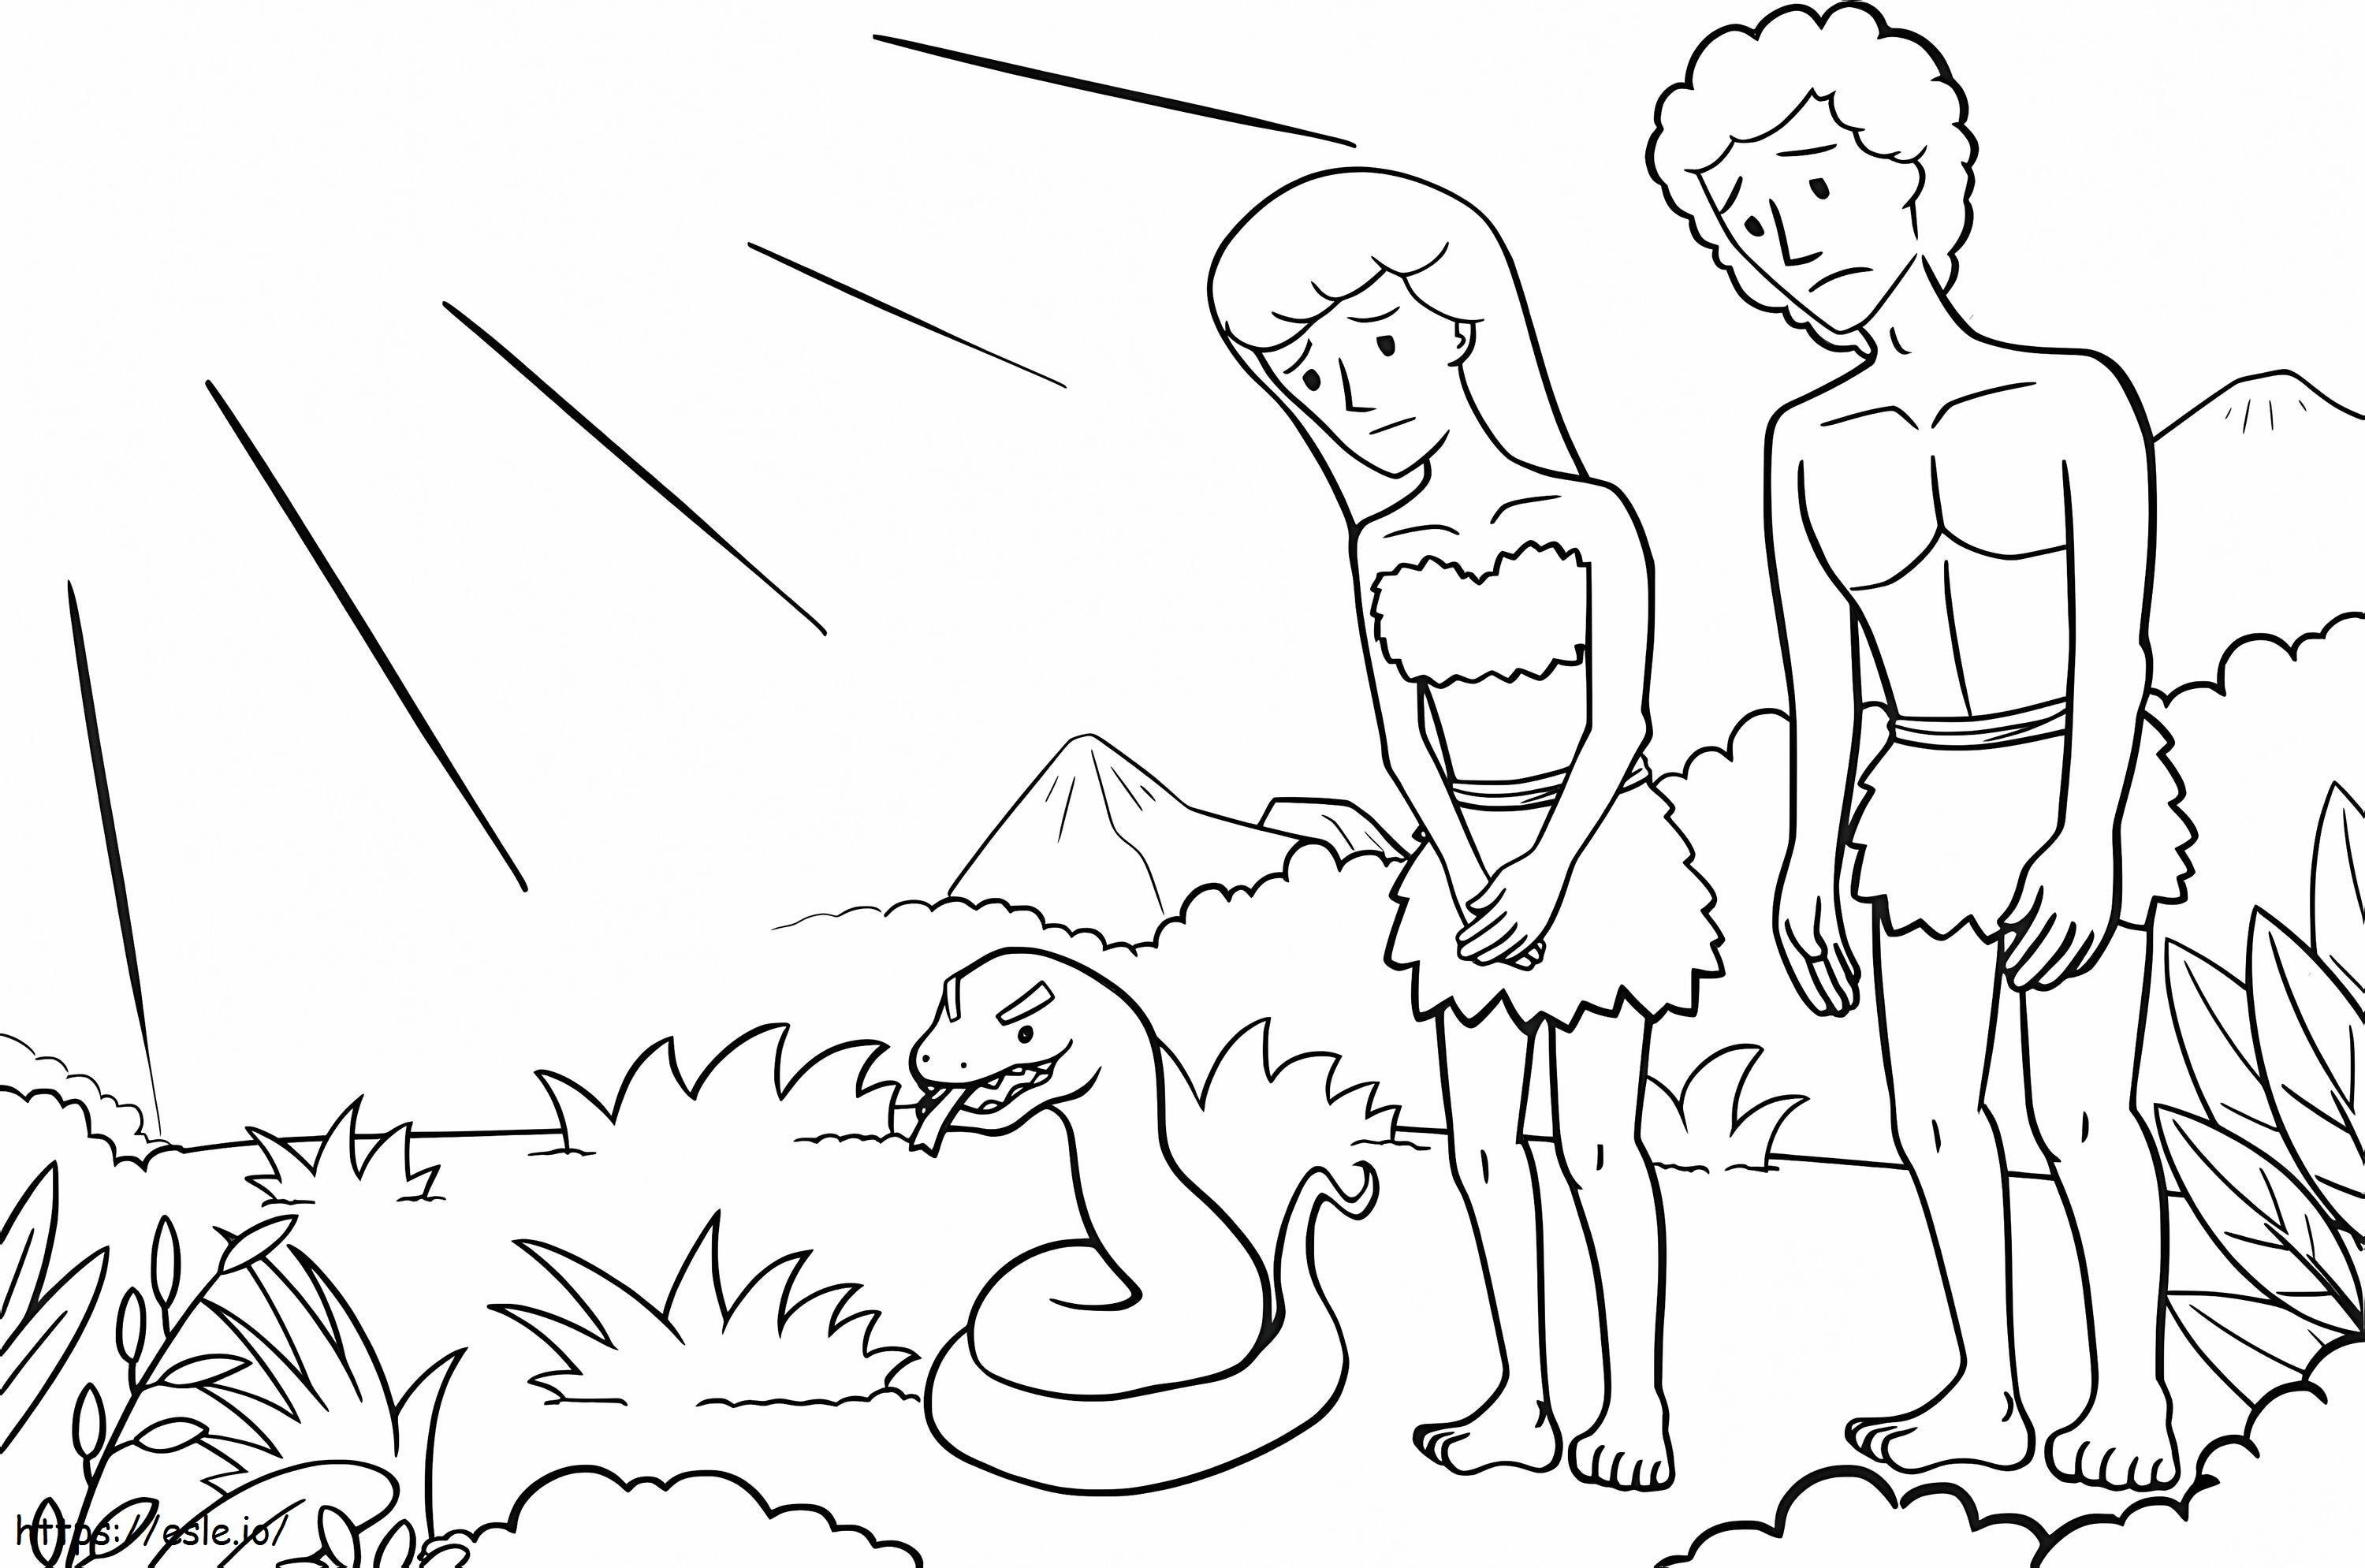 Fall Of Adam And Eve coloring page